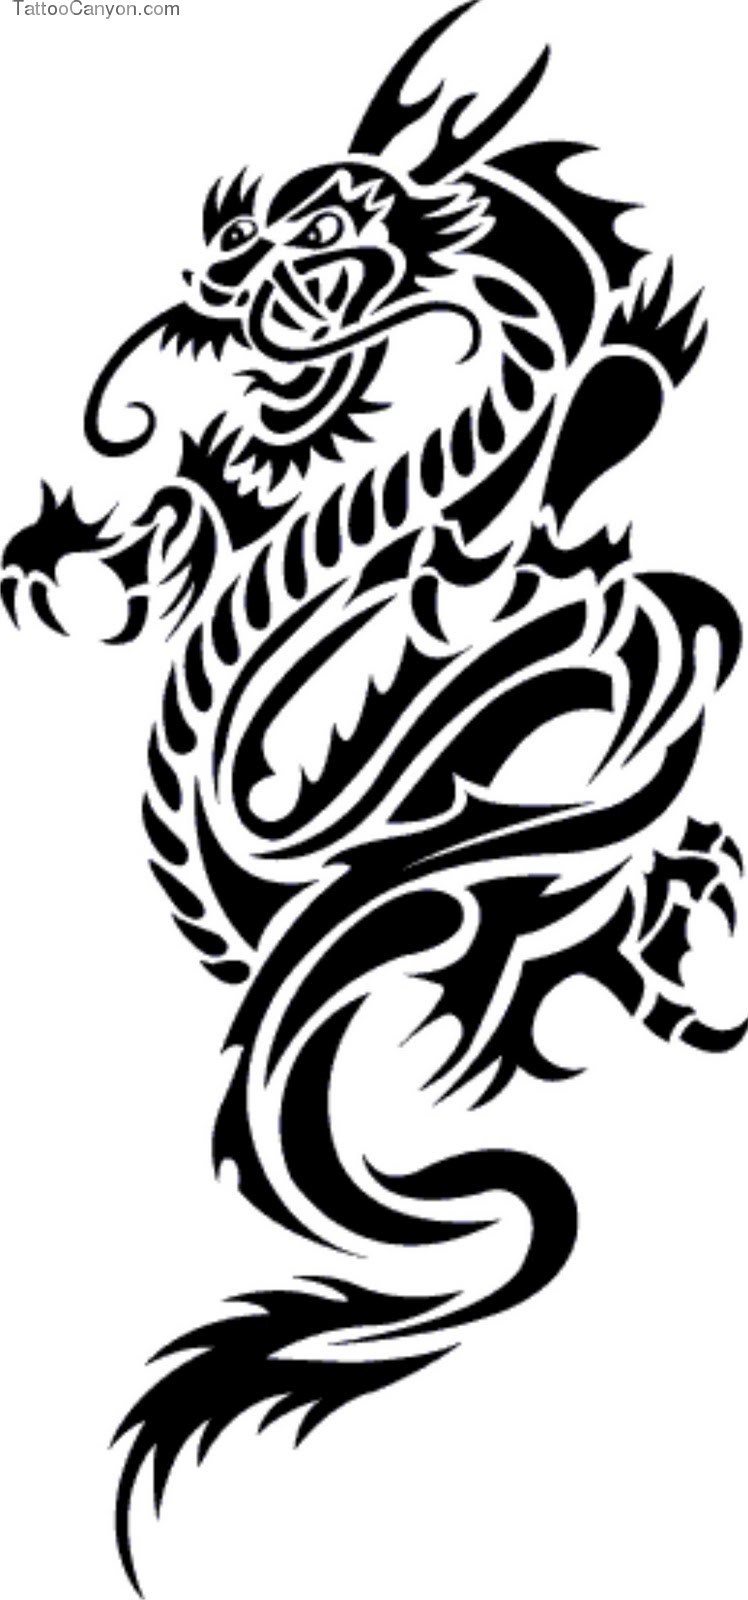 Dragon Images Free Download | Free Download Clip Art | Free Clip ...